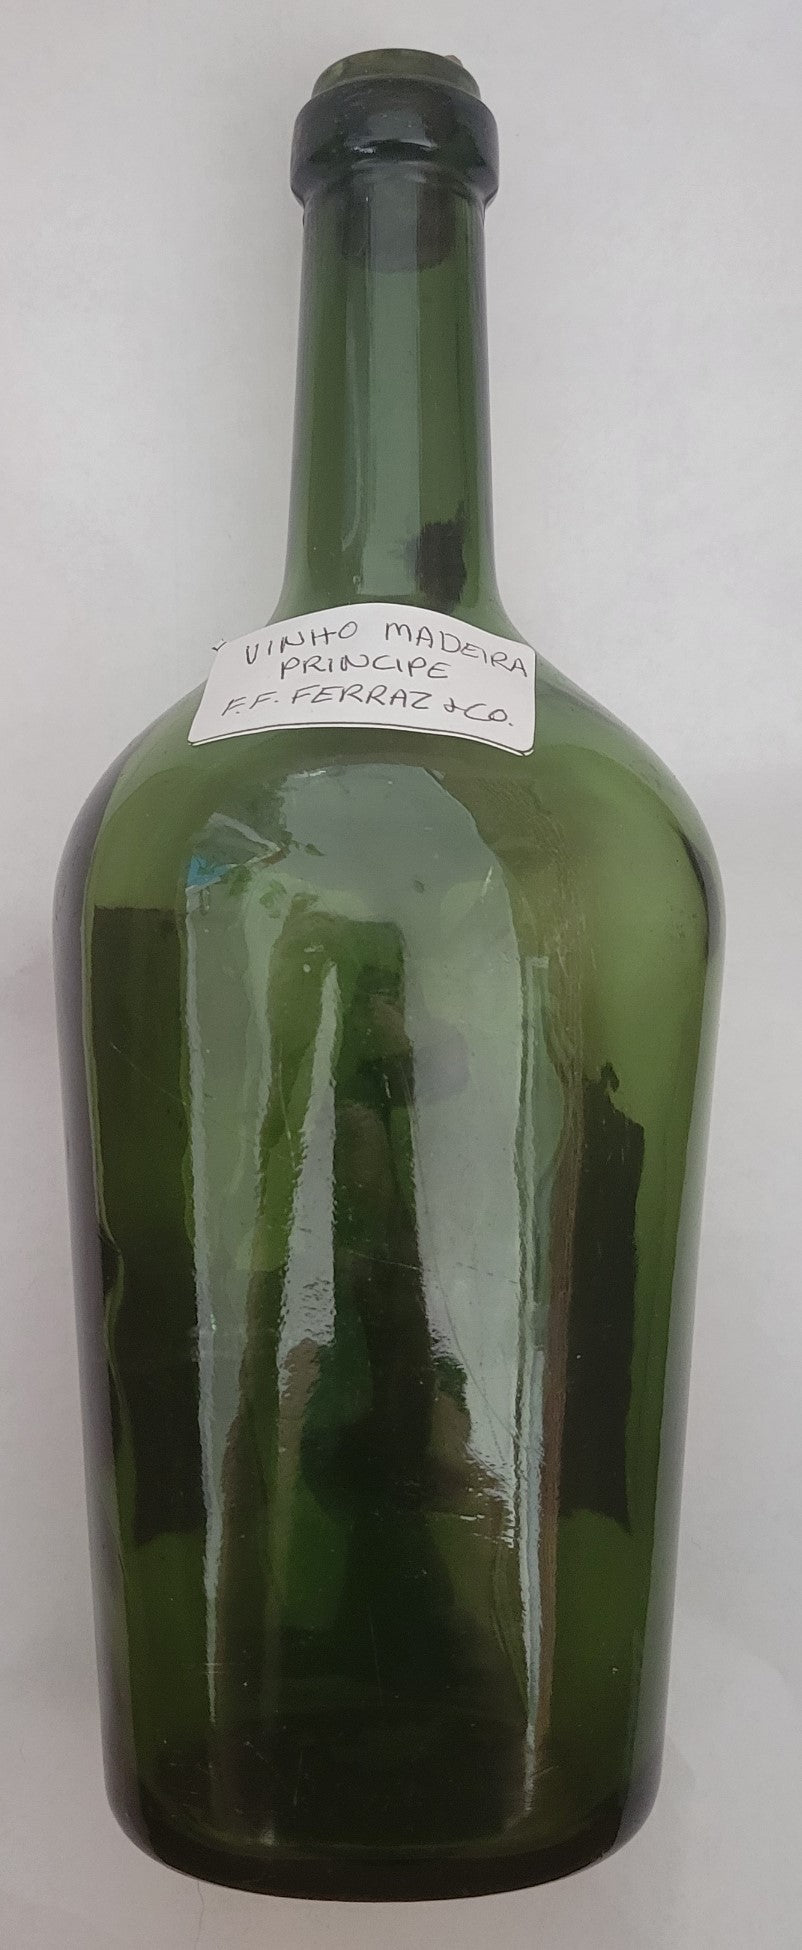 Antique Vinho Madeira Principe Wine Bottle by F. F. Ferraz & Co. from Portugal. Back cover.